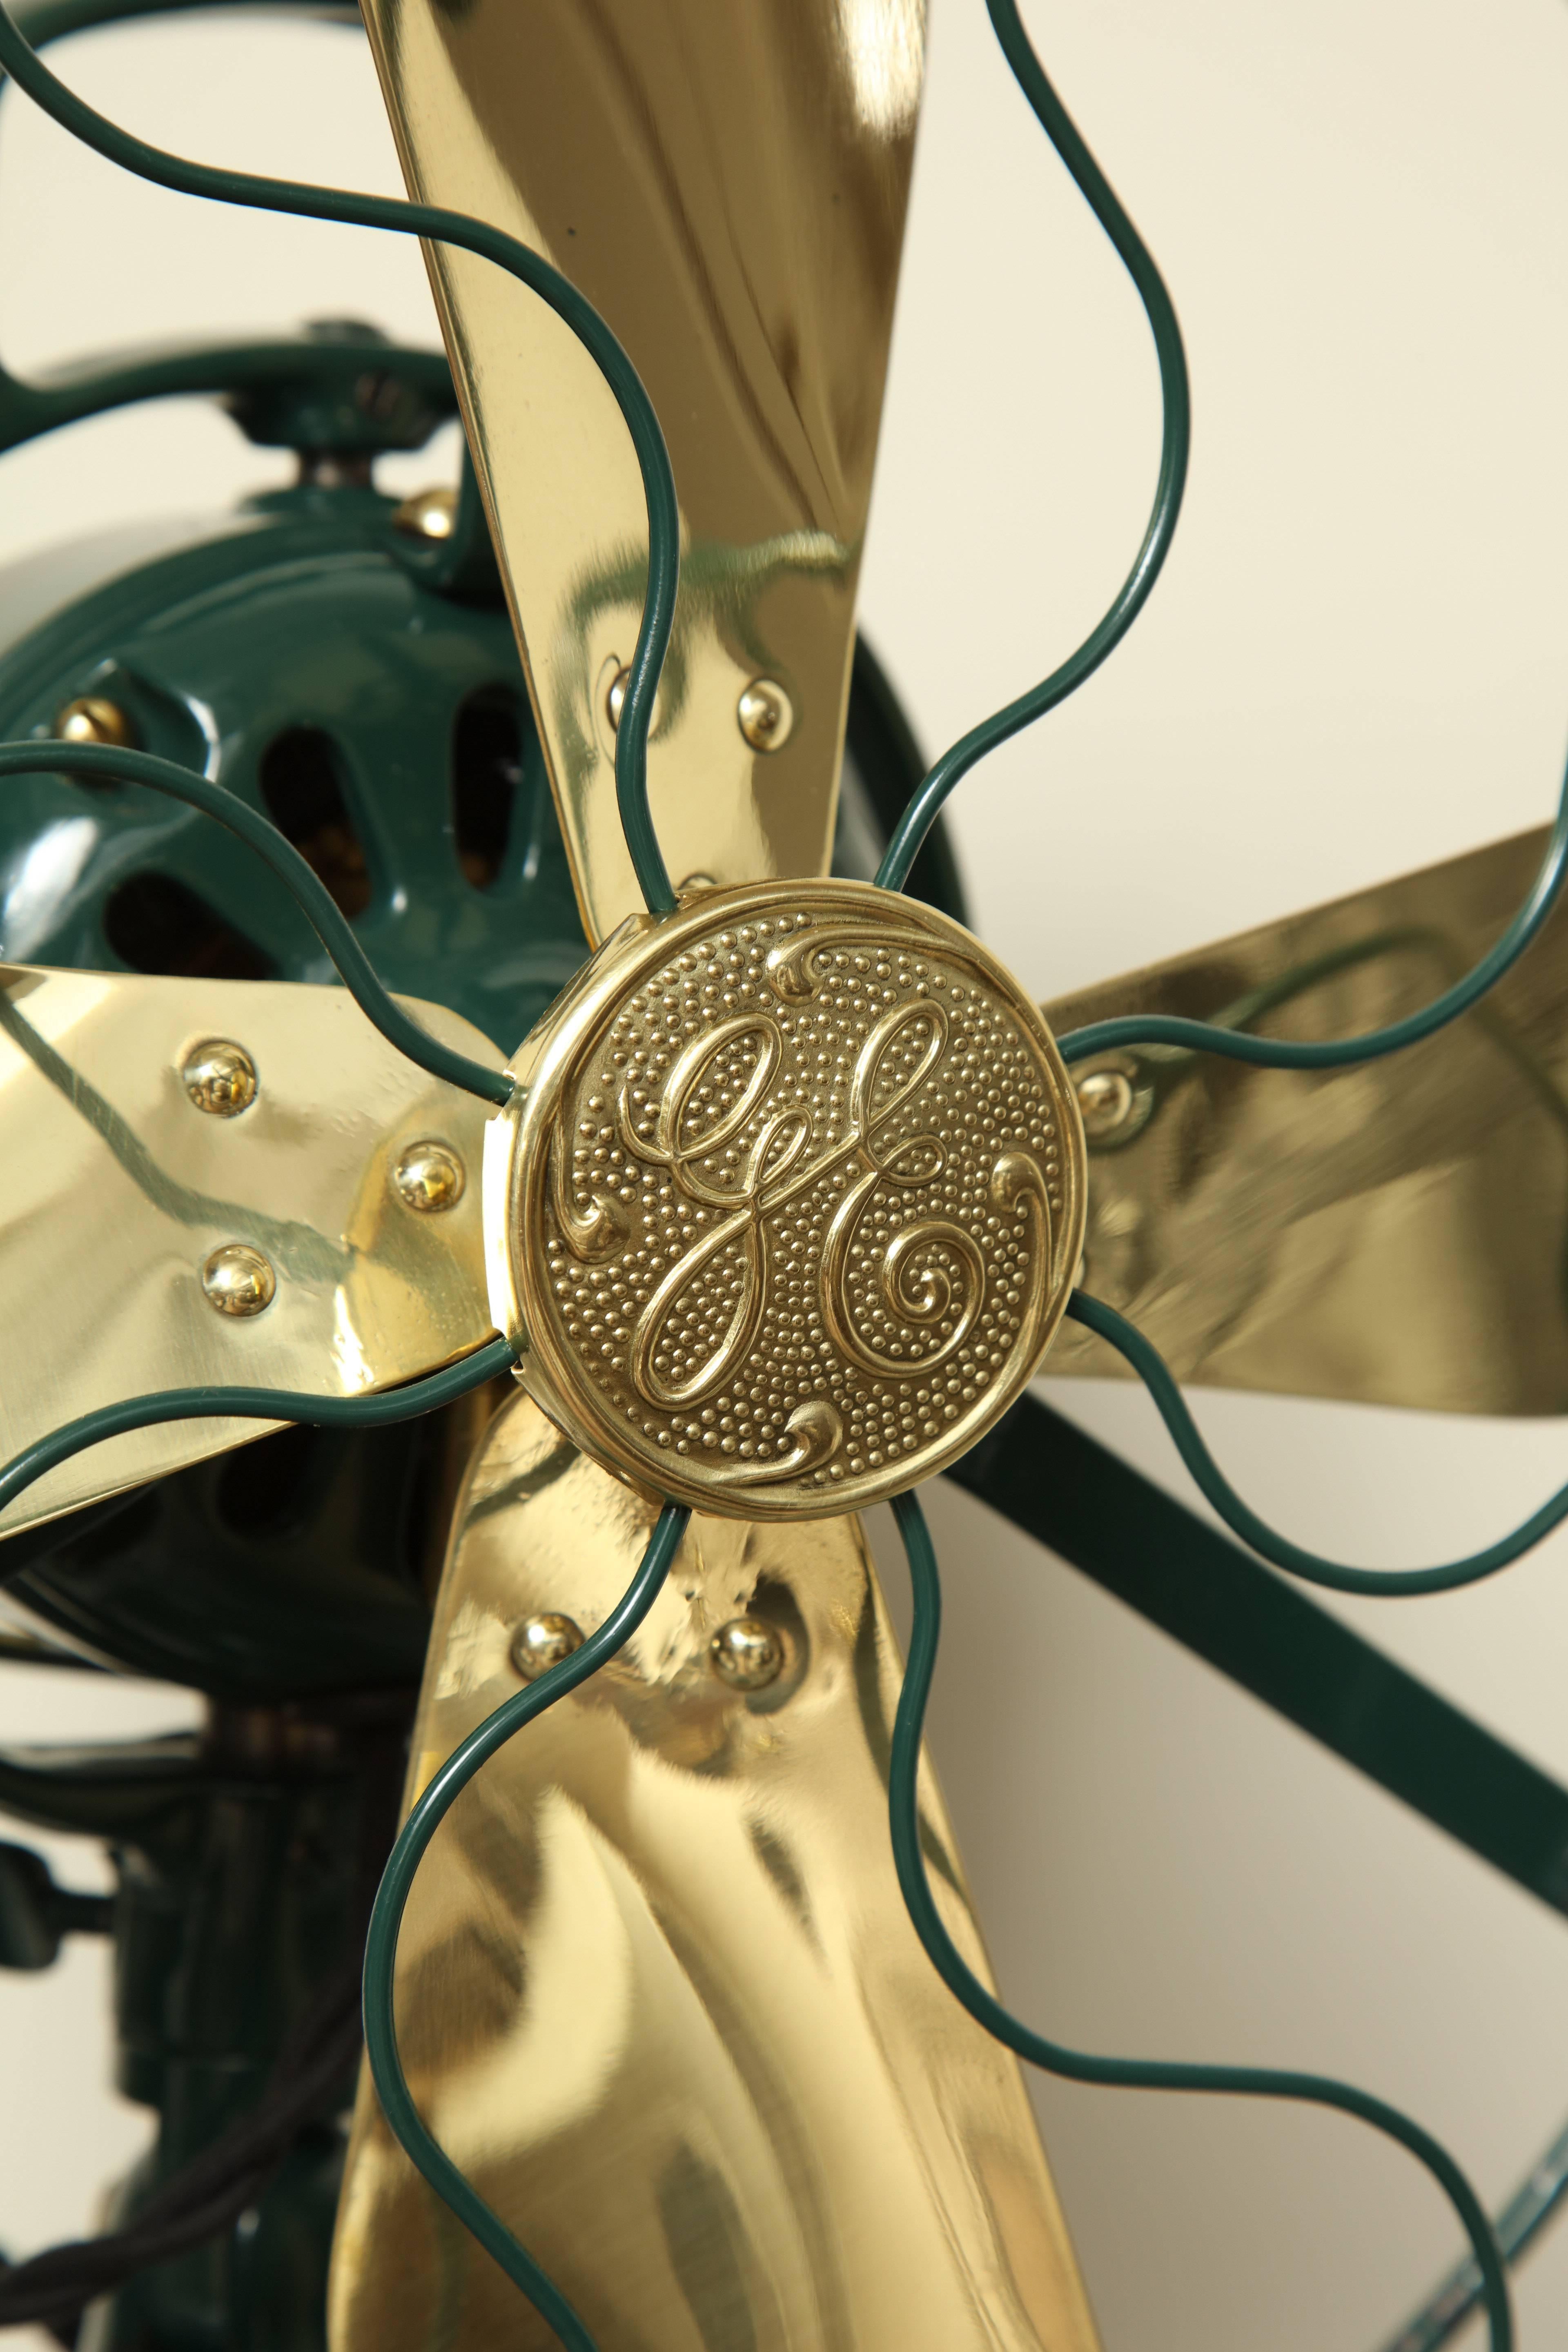 1920s General Electric three-speed oscillating fan with solid brass blade and green powdercoated body - restored professionally, maintain with oil every 3 months of use.